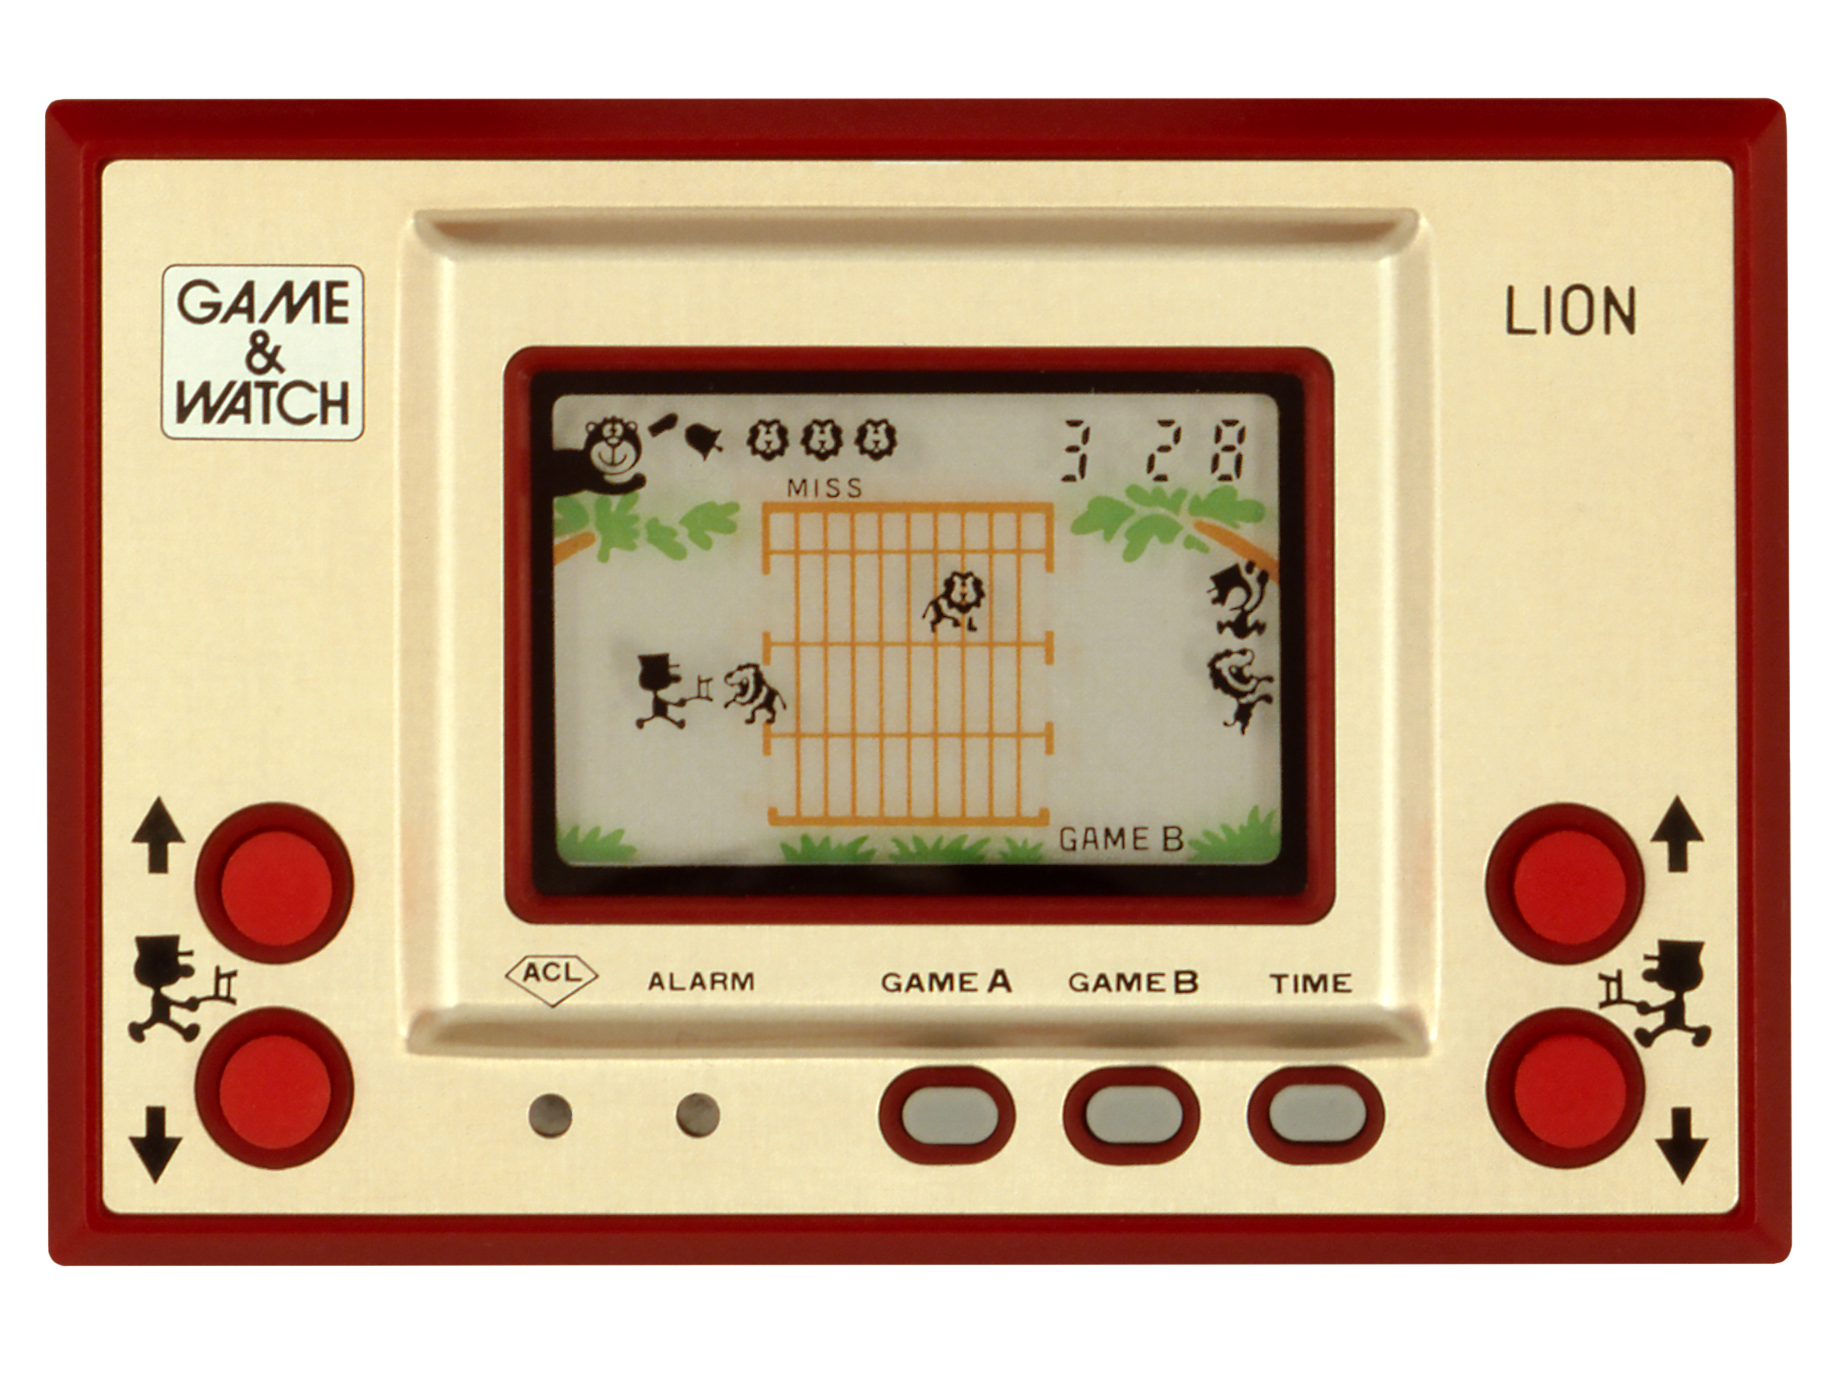 Nintendo game and watch Ball. Nintendo game & watch. Нинтендо гейм и вотч. Game and watch Lion. Watch this game